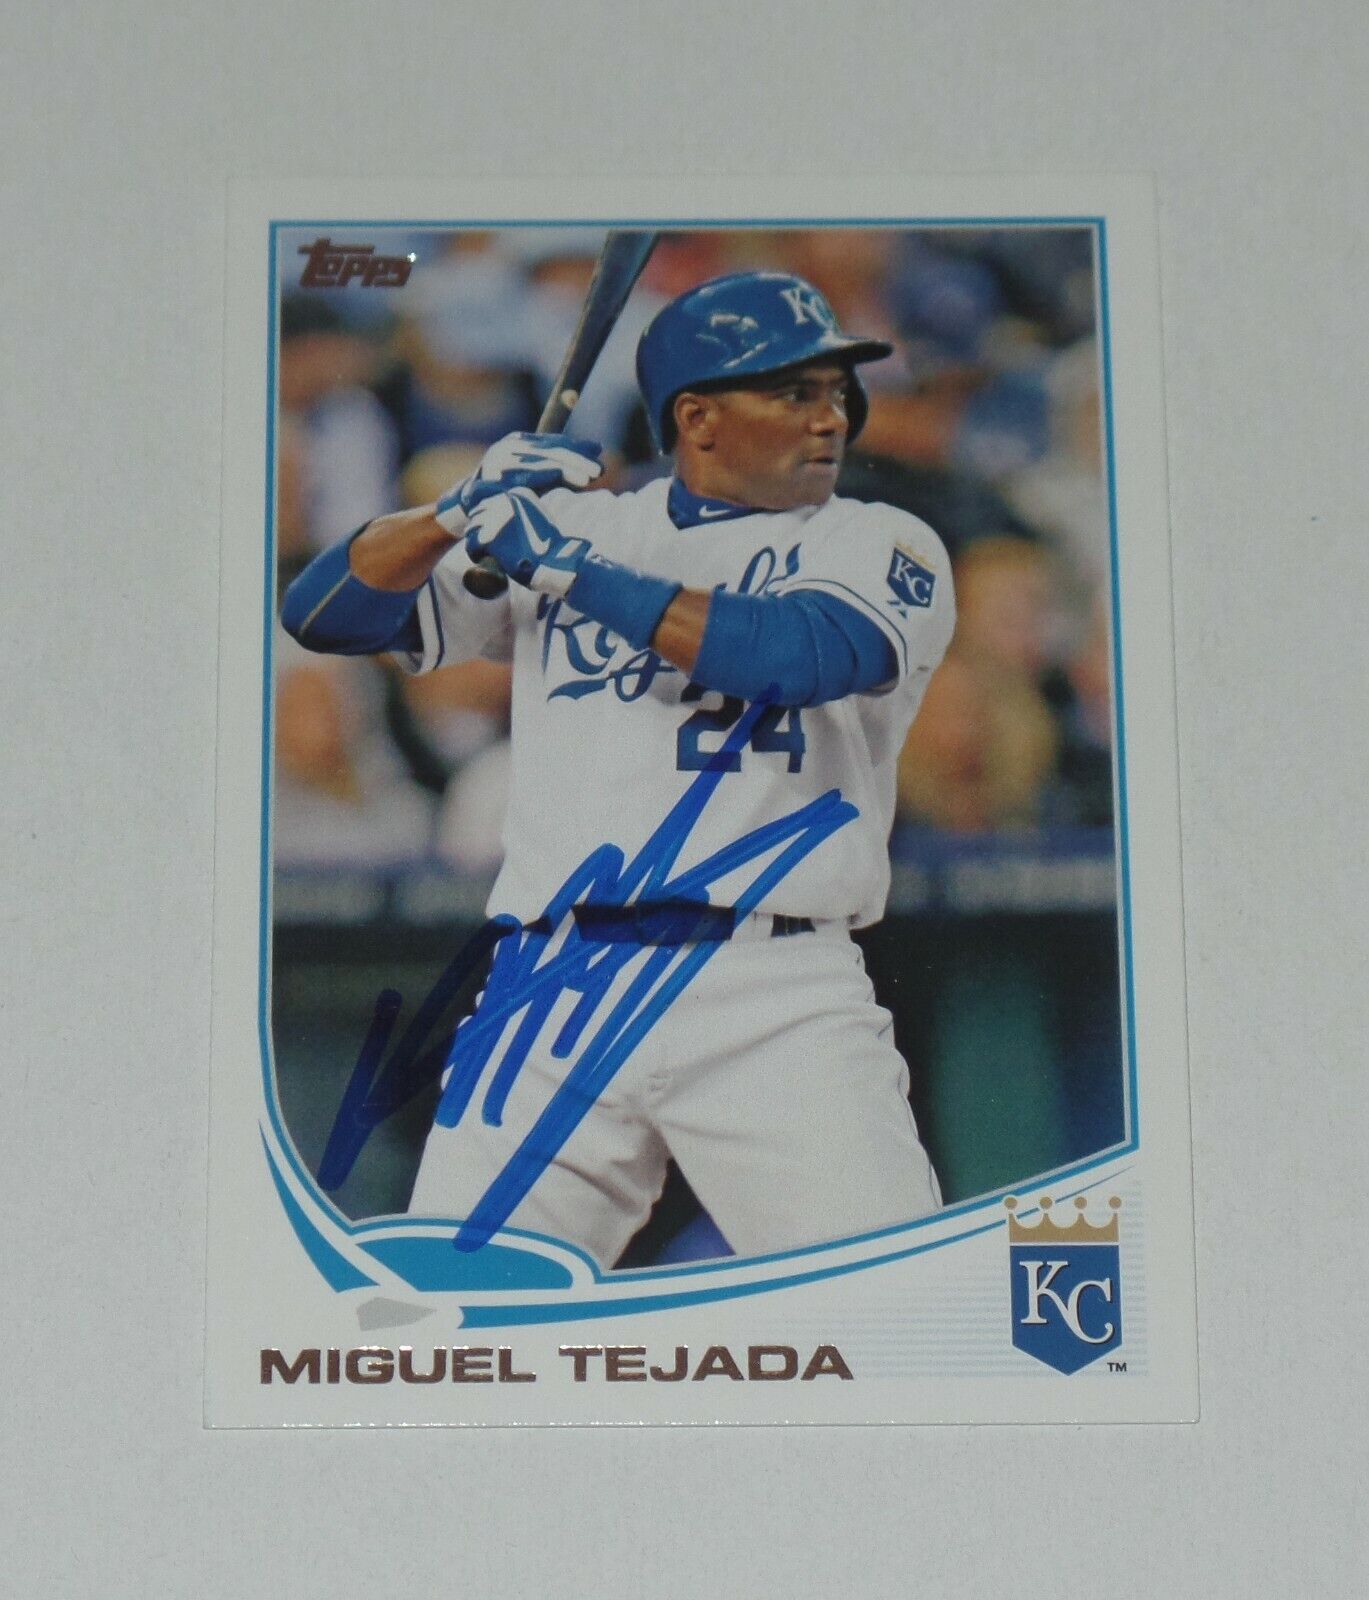 MIGUEL TEJADA SIGNED AUTO\'D 2012 TOPPS CARD #US170 GIANTS KANSAS CITY ROYALS A\'S